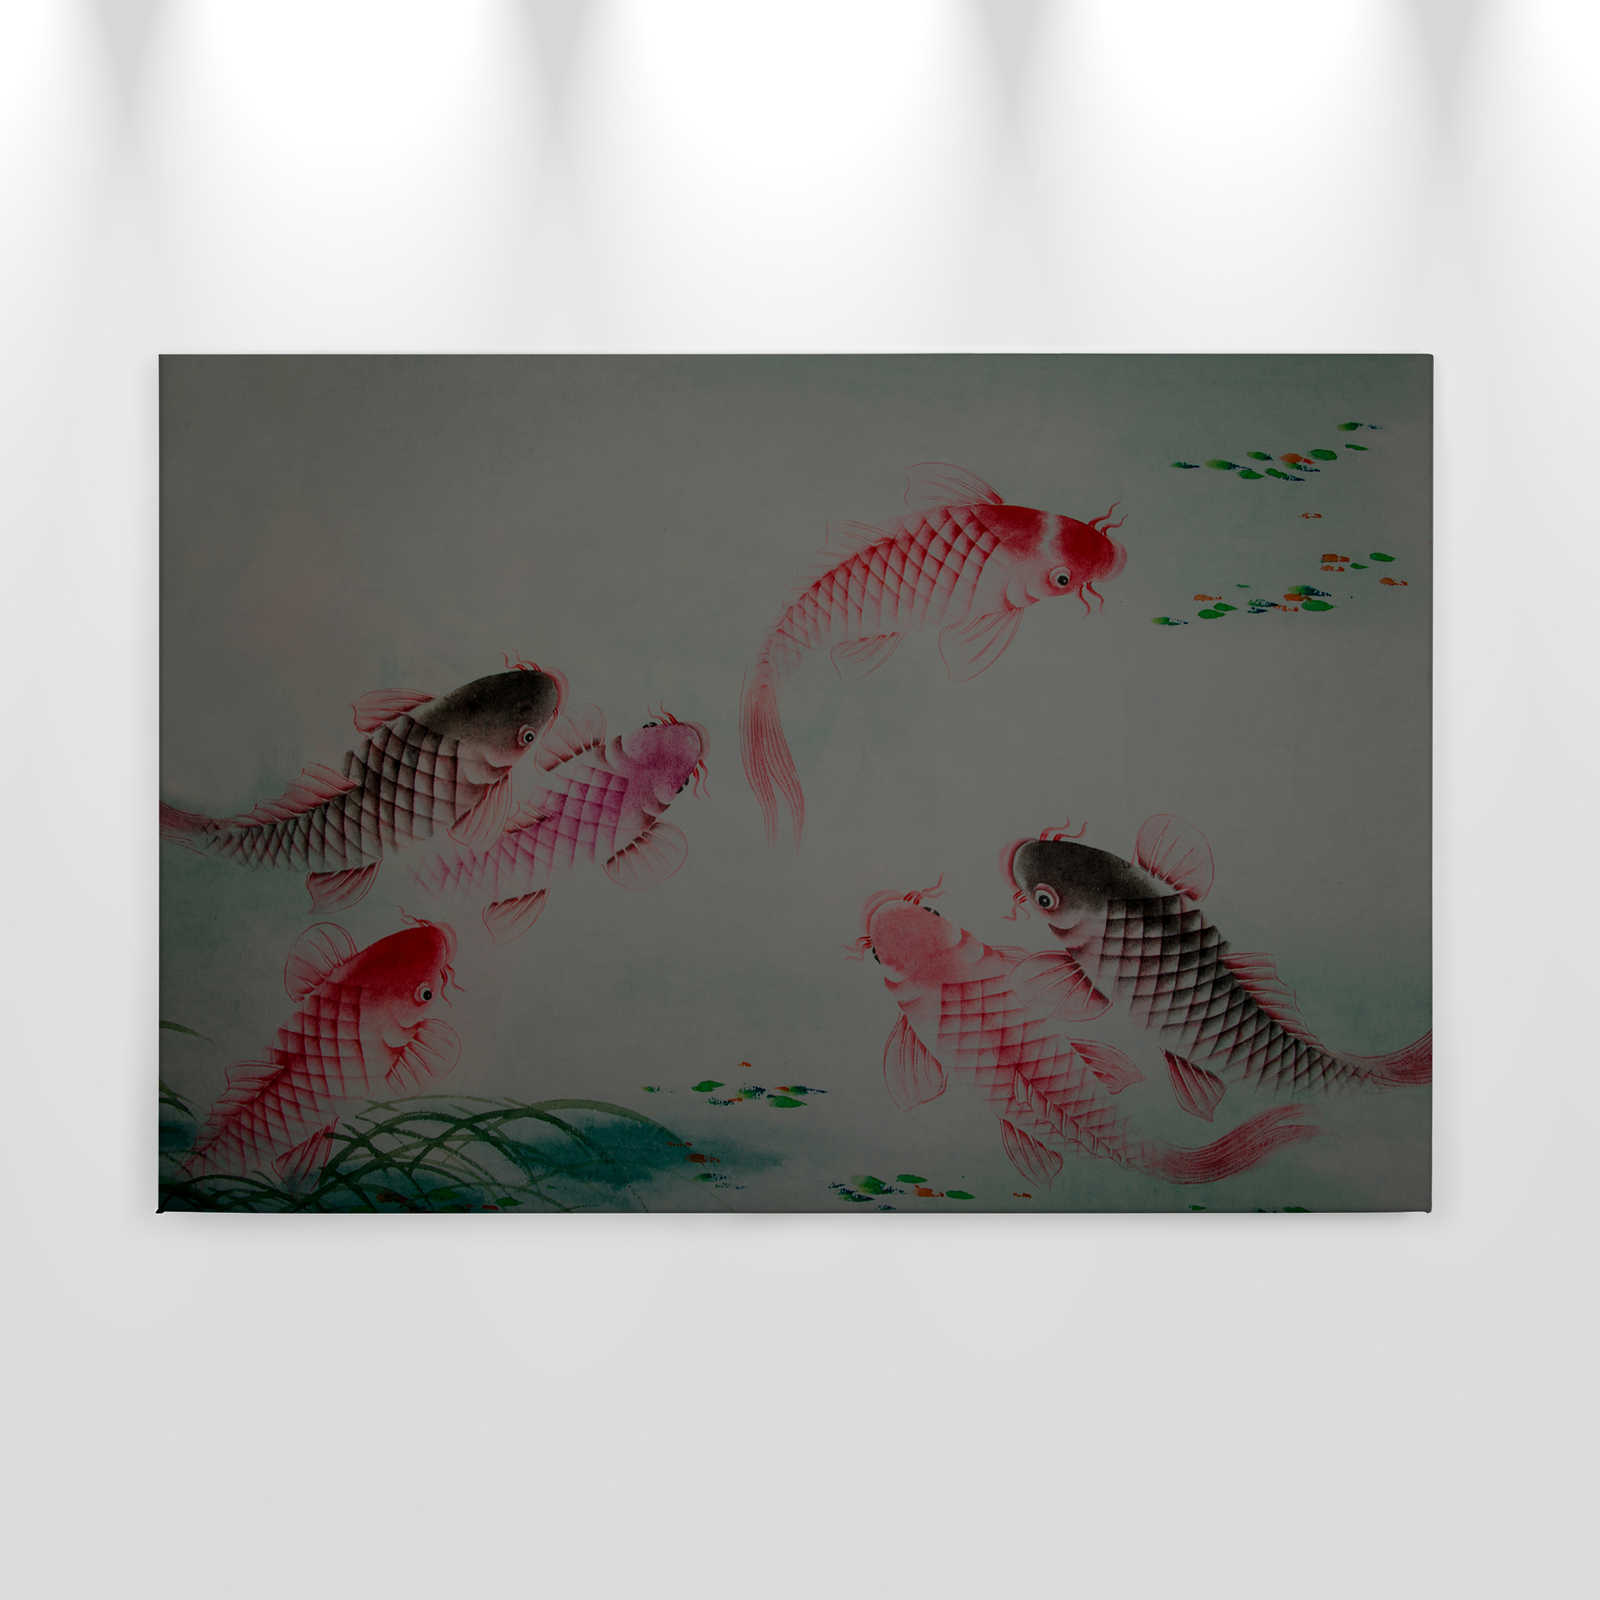             Canvas painting Asia Style with Koi pond | walls by patel - 0,90 m x 0,60 m
        